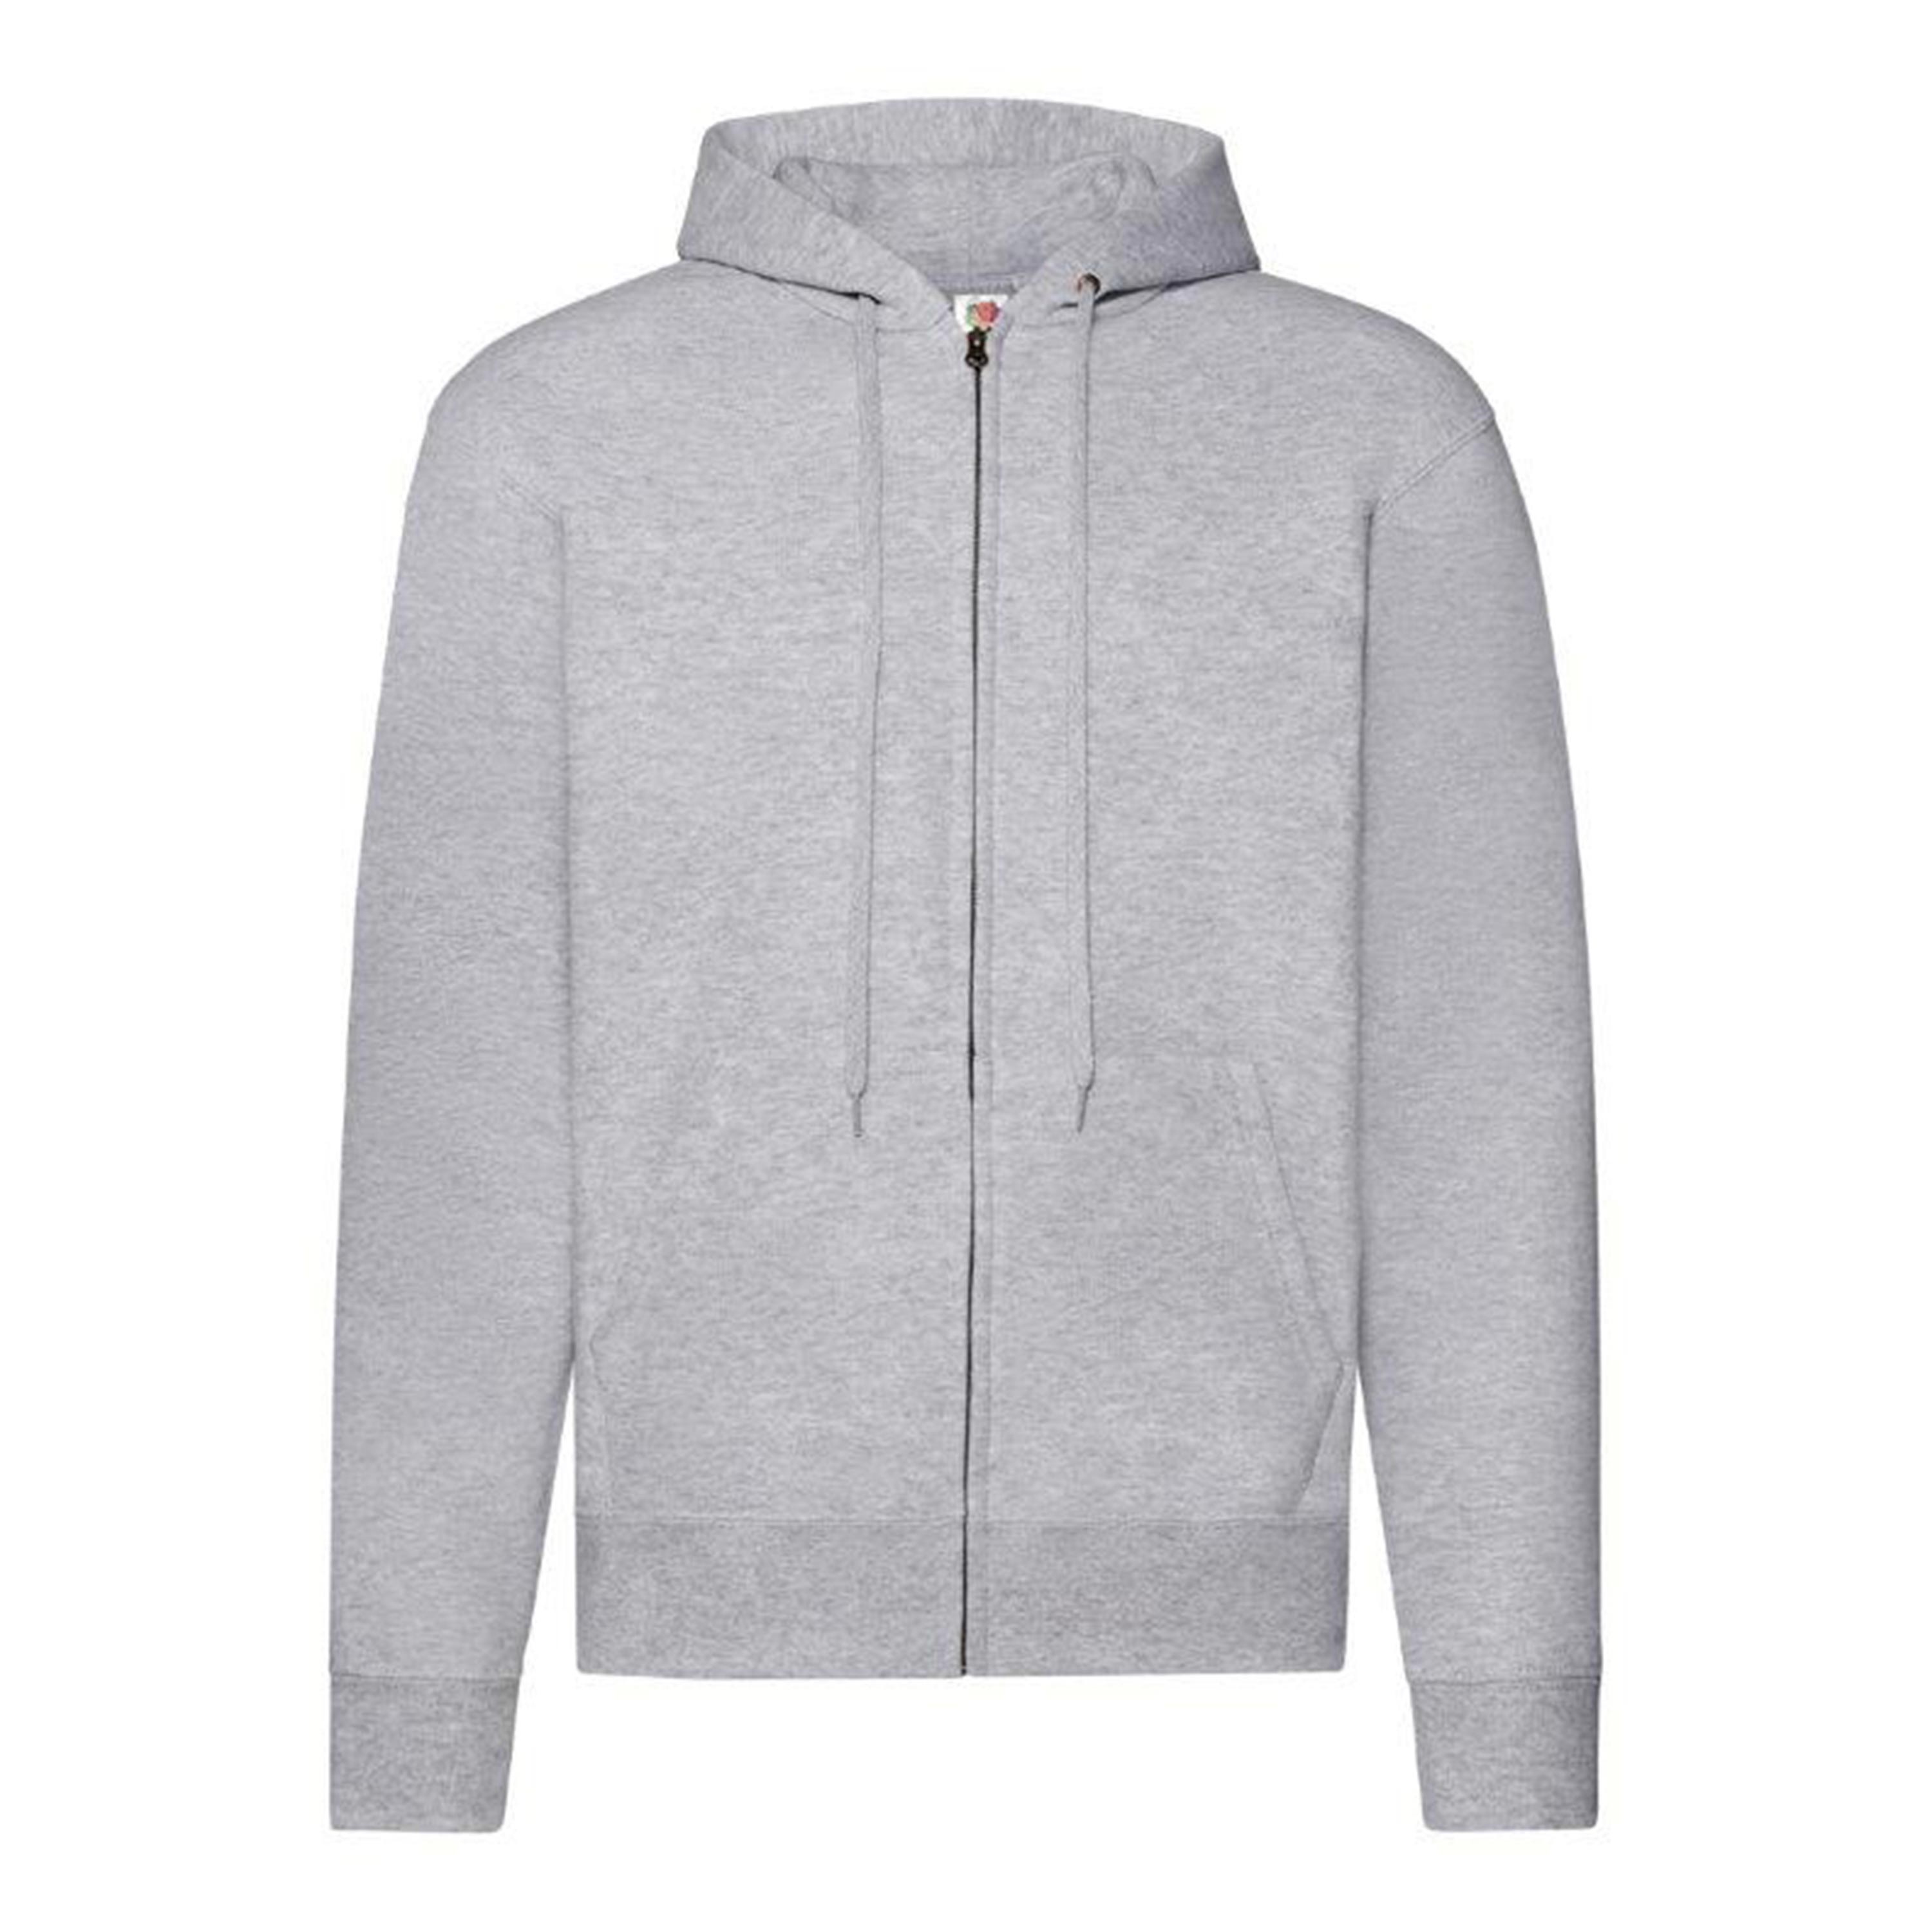 Purchase the Fruit of the Loom Classic Hooded Sweat Jacket heath